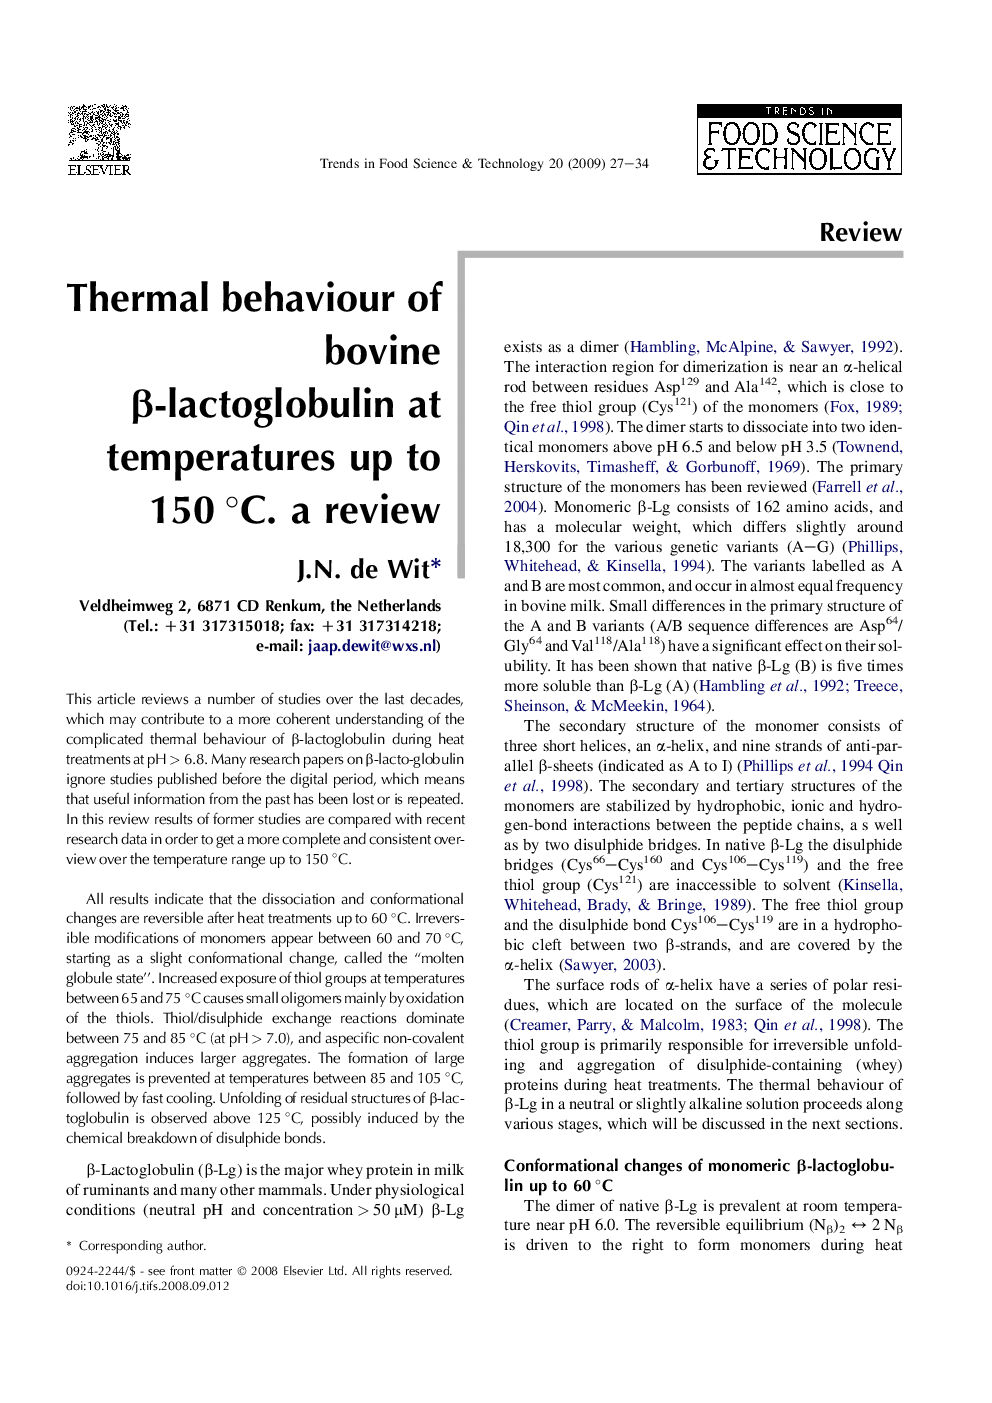 Thermal behaviour of bovine β-lactoglobulin at temperatures up to 150 °C. a review